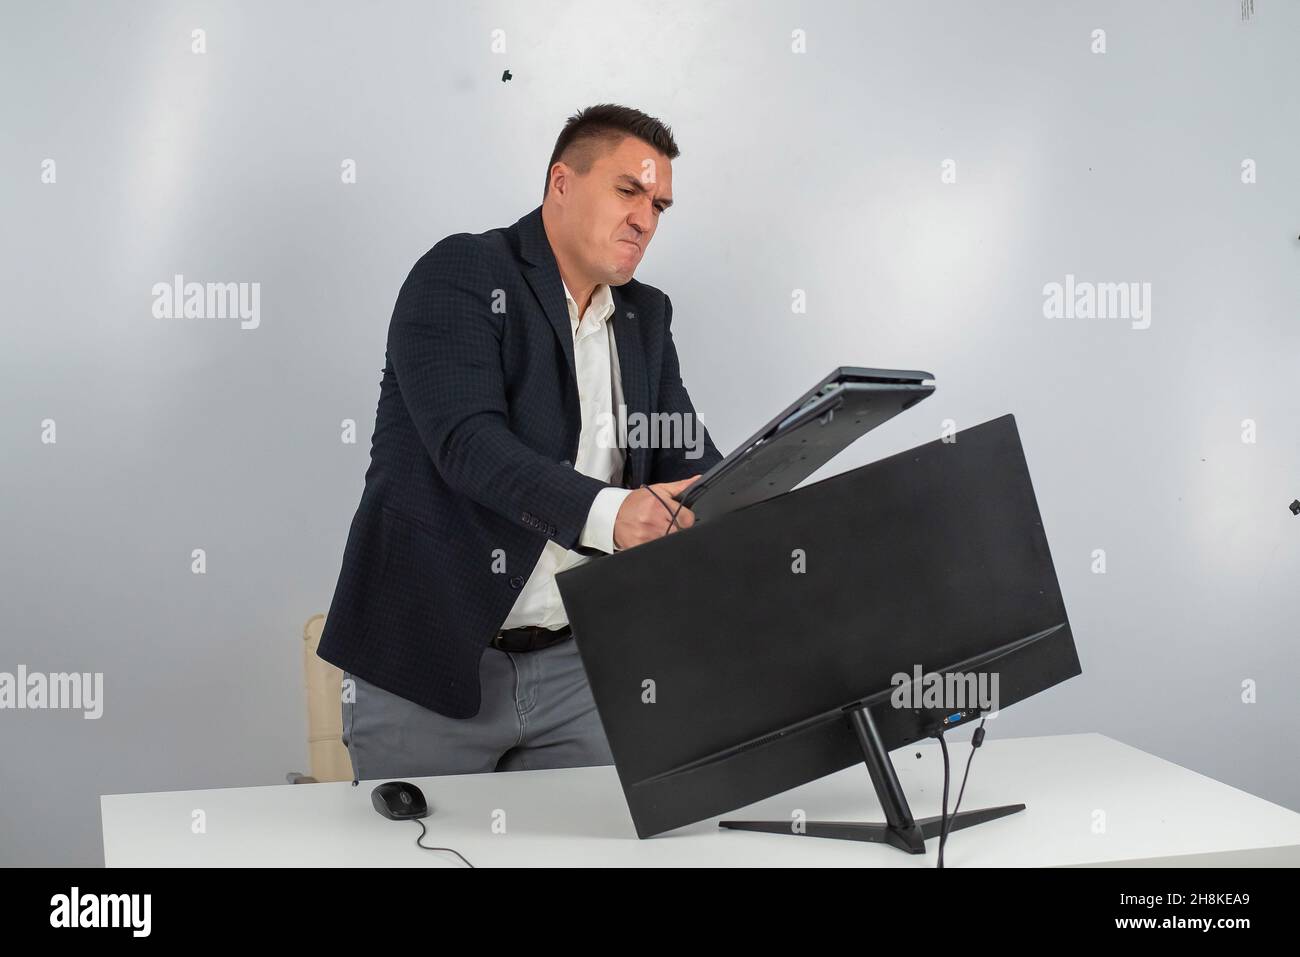 Caucasian man in a suit gets angry and smashes the keyboard on the monitor. An office worker in a rage breaks the computer. Stock Photo